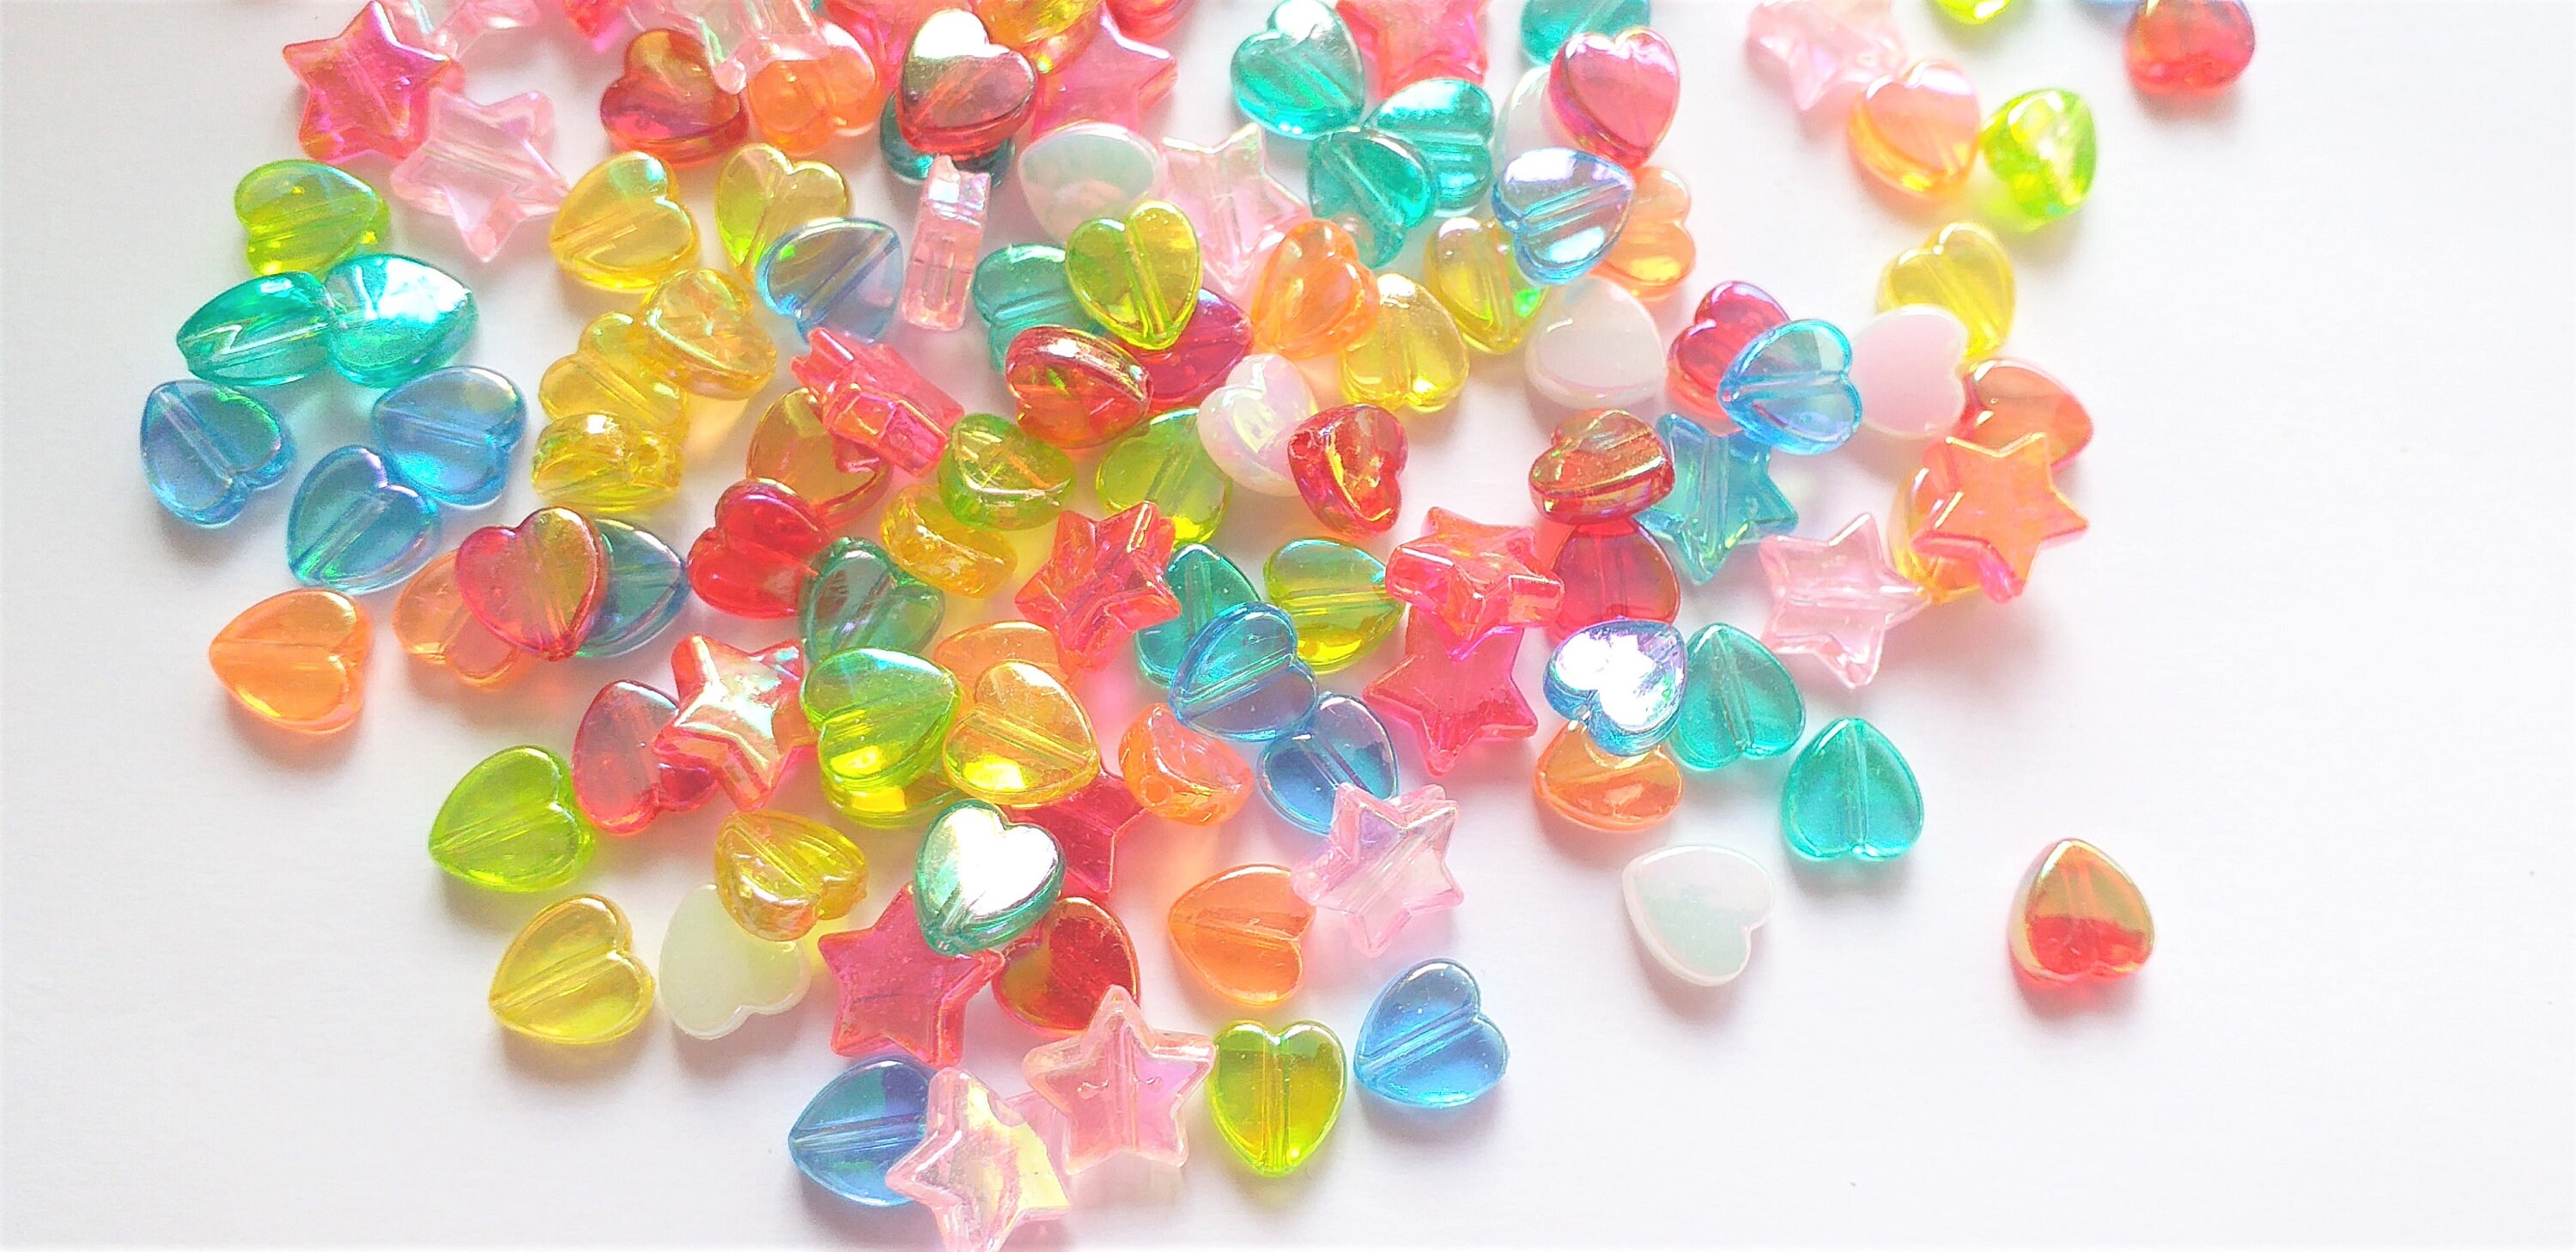 25g Lovely Heart-shaped Bow Children's Decorative Beads Mixed with